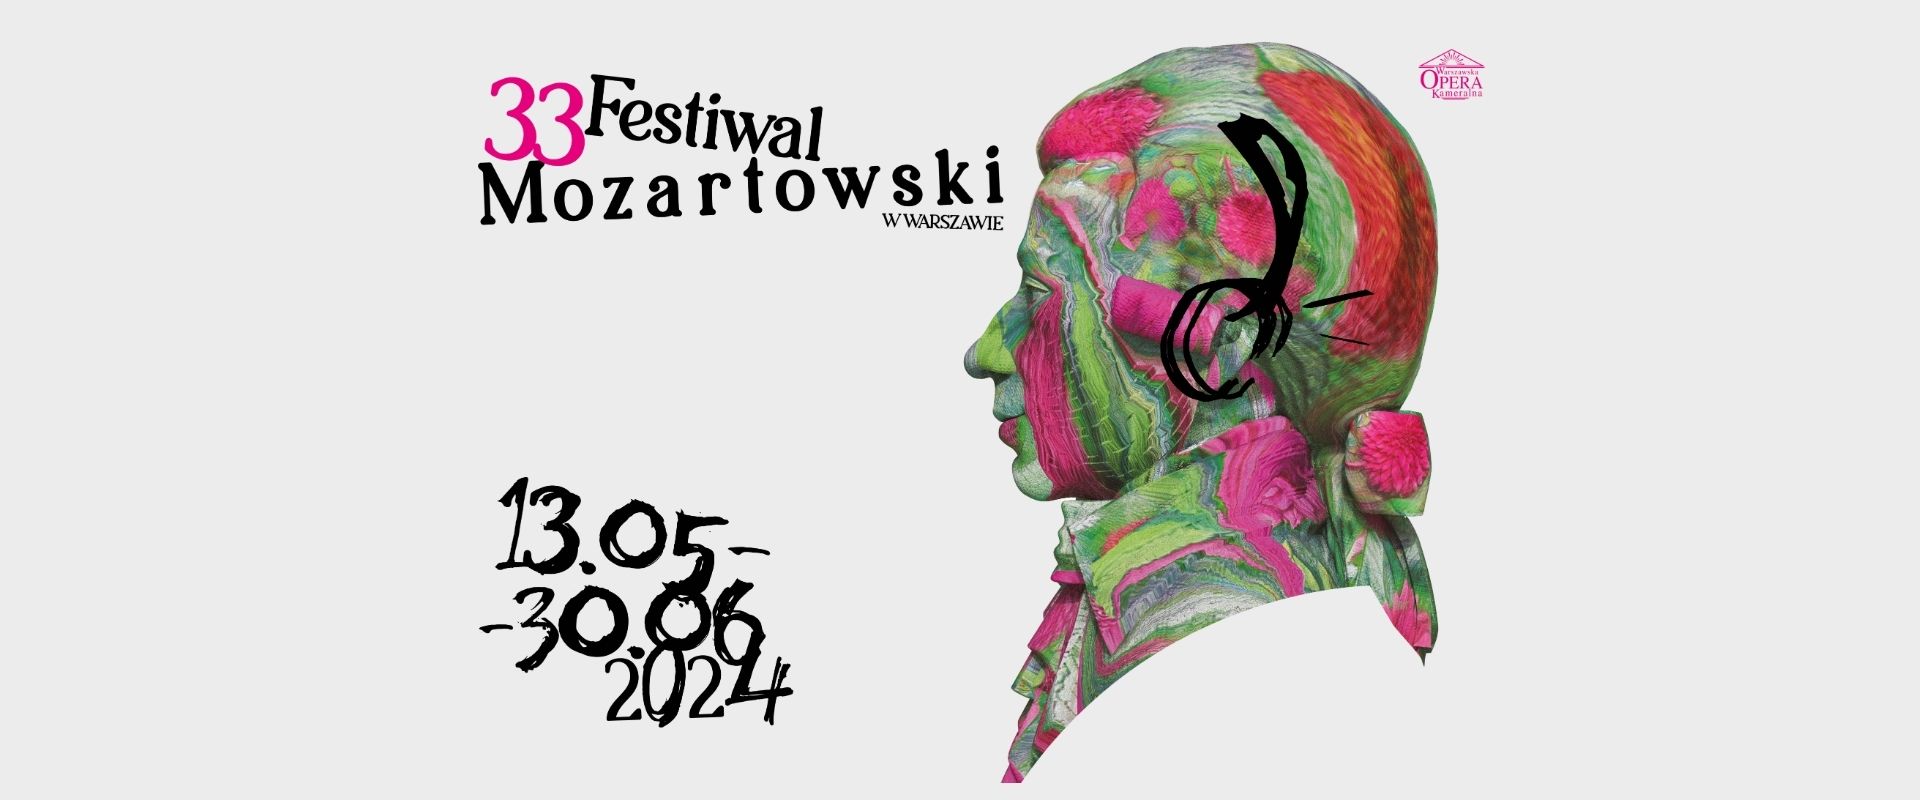 The 33rd Mozart Festival to be held in Warsaw and Vienna